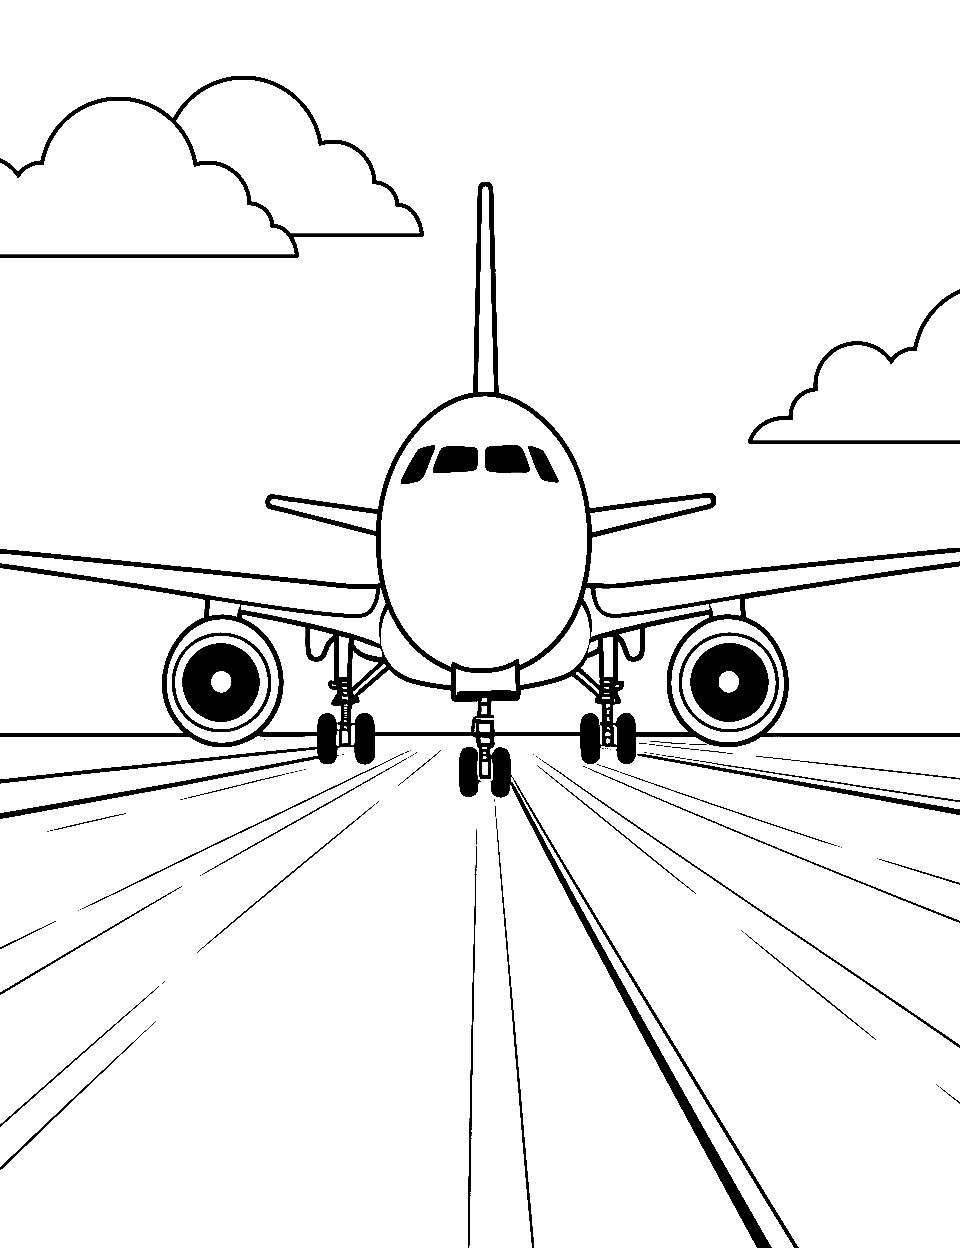 Runway Ready Airplane Coloring Page - An airplane on the runway ready to take off.